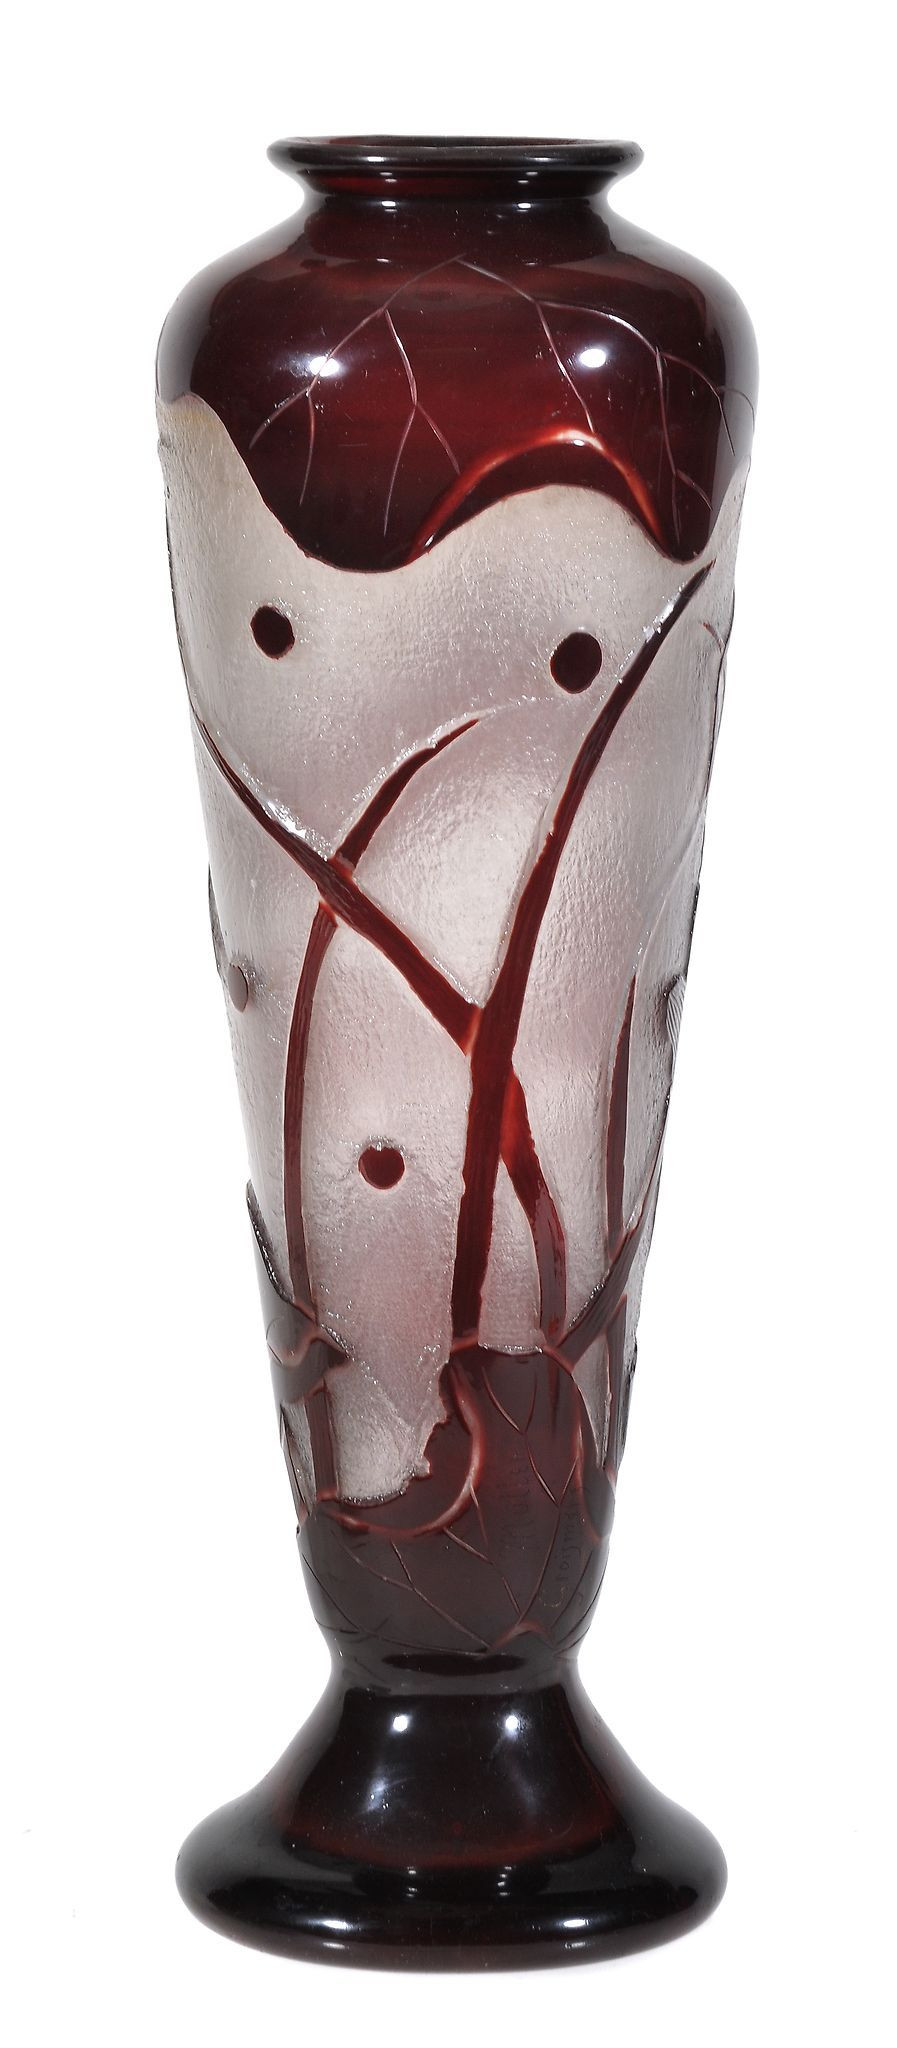 26 Nice Galle Cameo Glass Vase 2024 free download galle cameo glass vase of pikby social media analytics statistics tools inside a muller freres cameo glass vase red ground 36cm high